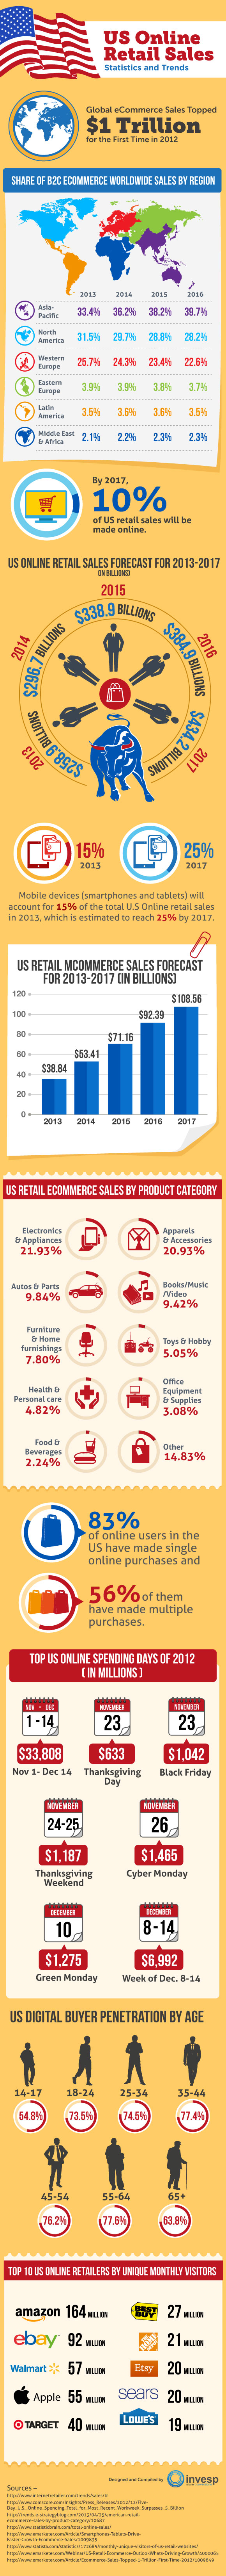 us-online-retail-sales--statistics-and-trends-infographic_51d840234fe51